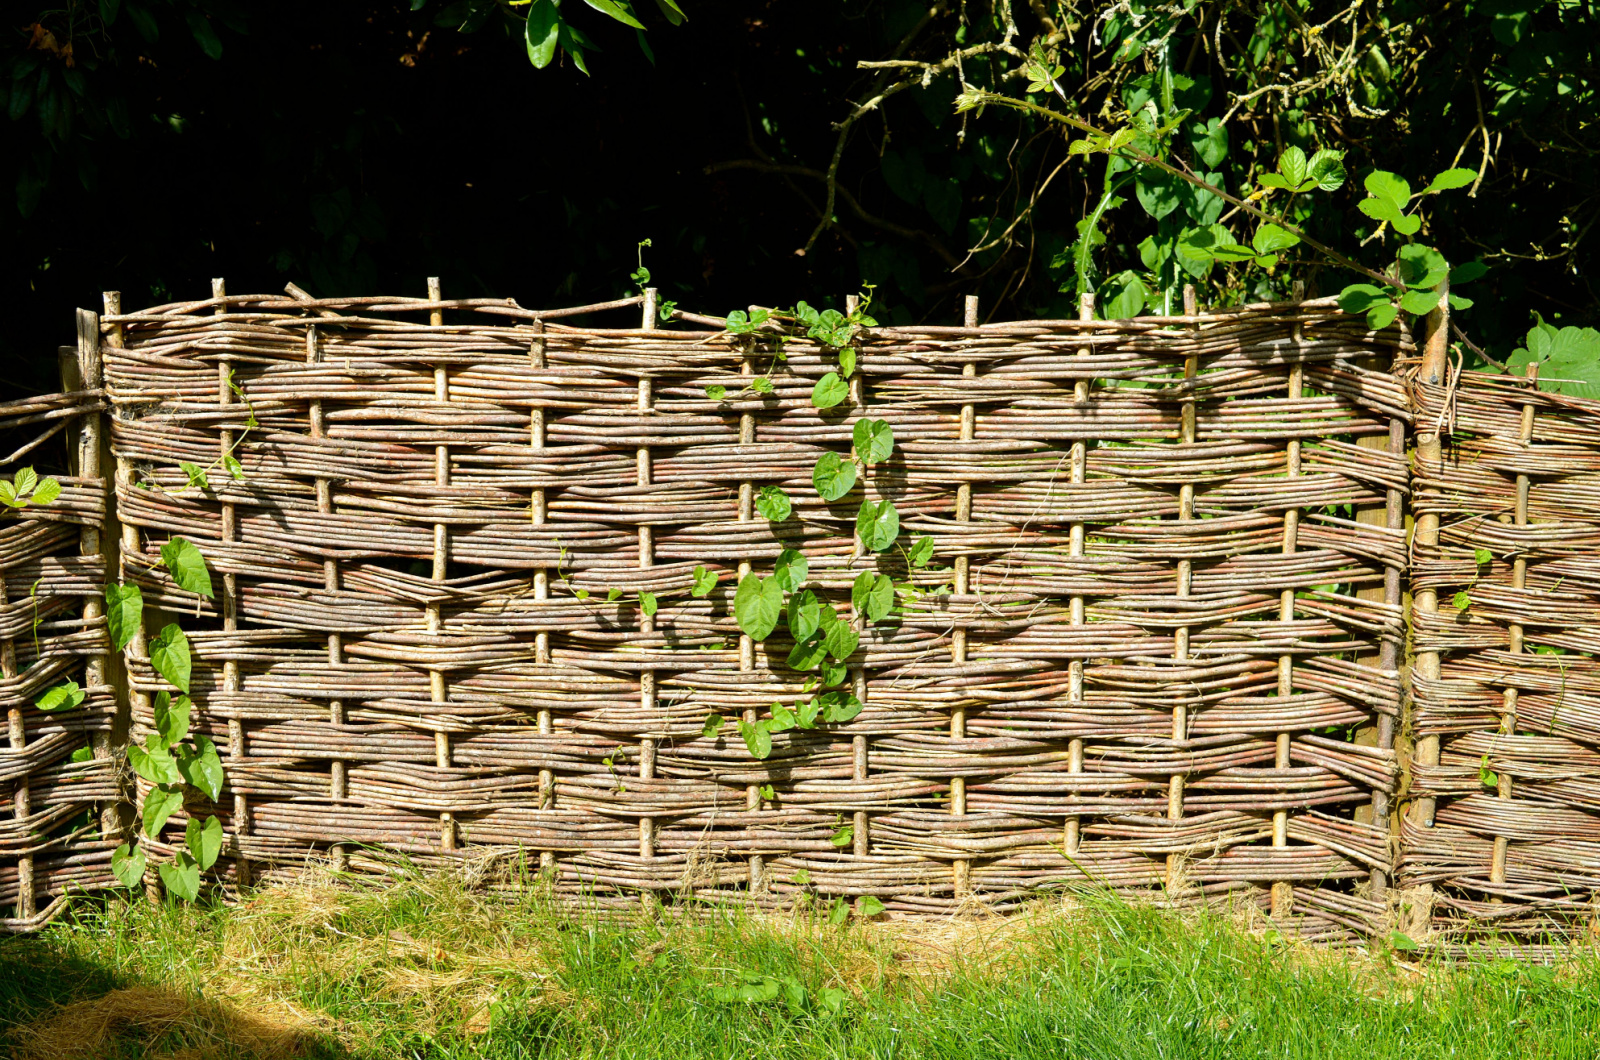 Wattle fence made by weaving thin branches